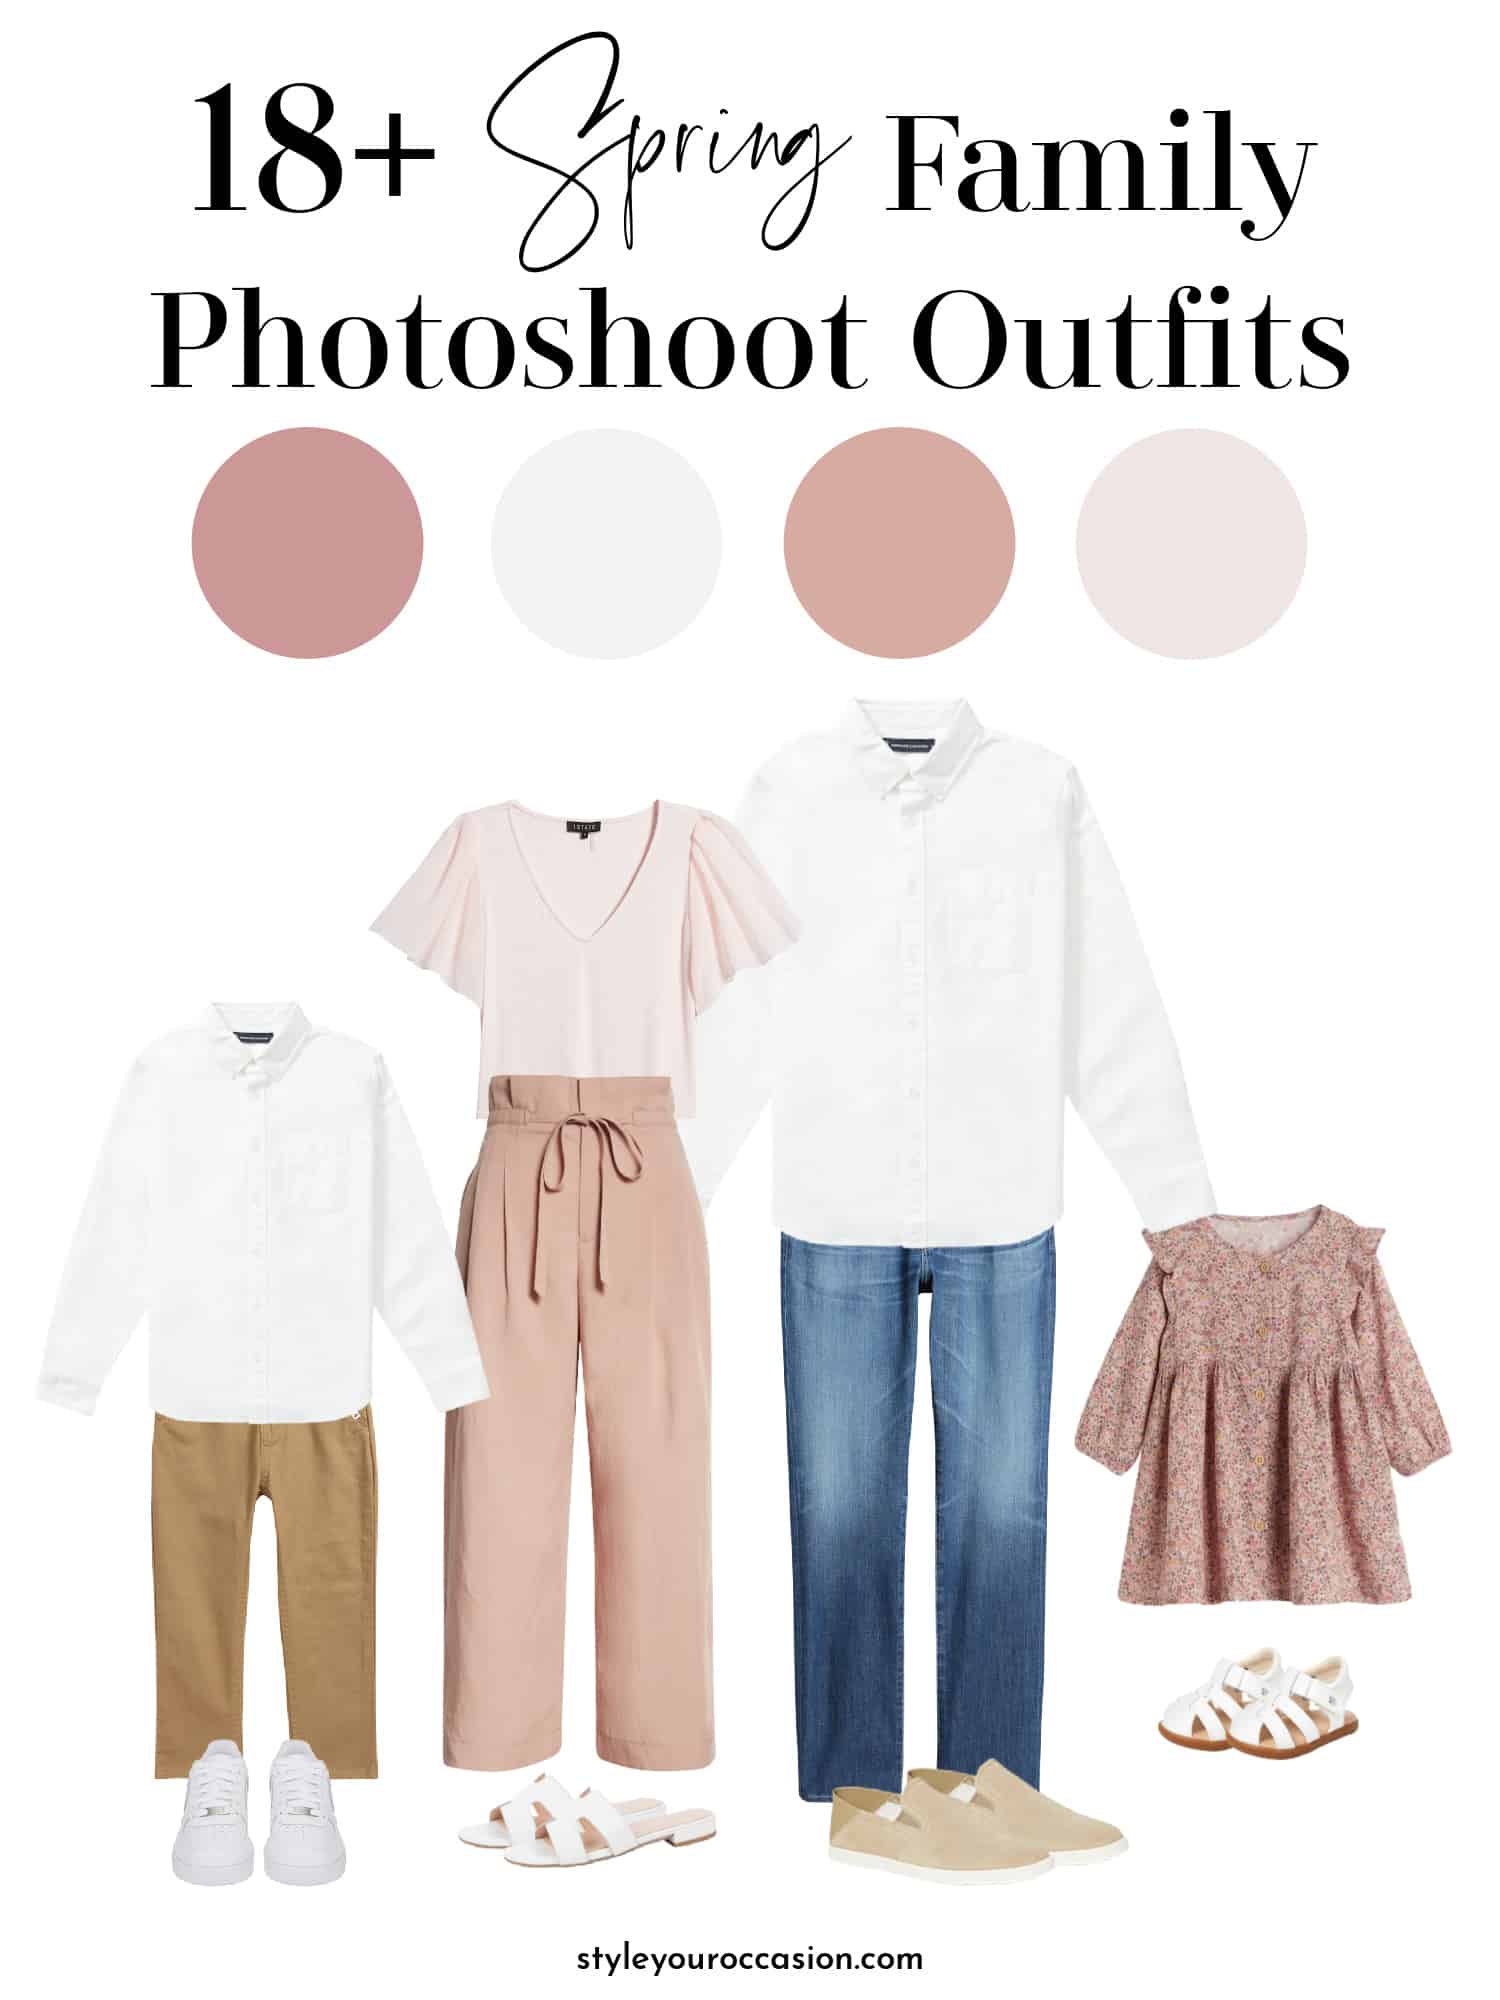 18+ Spring Family Photo Outfits You'll Love stylish, elevated, and fun!